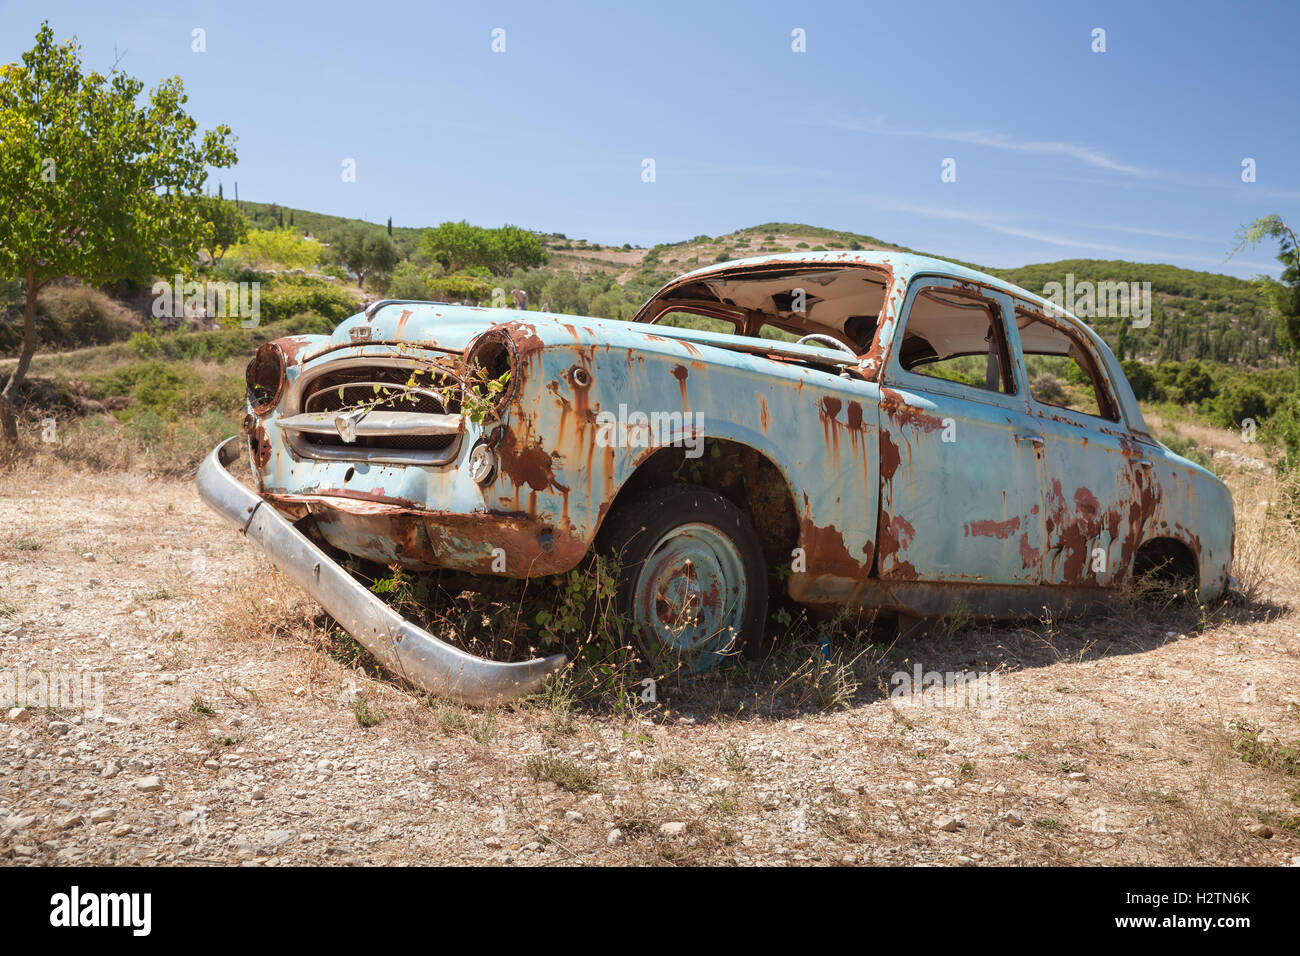 Zakynthos, Greece - August 20, 2016: Old abandoned rusted retro car stands in summer garden Stock Photo